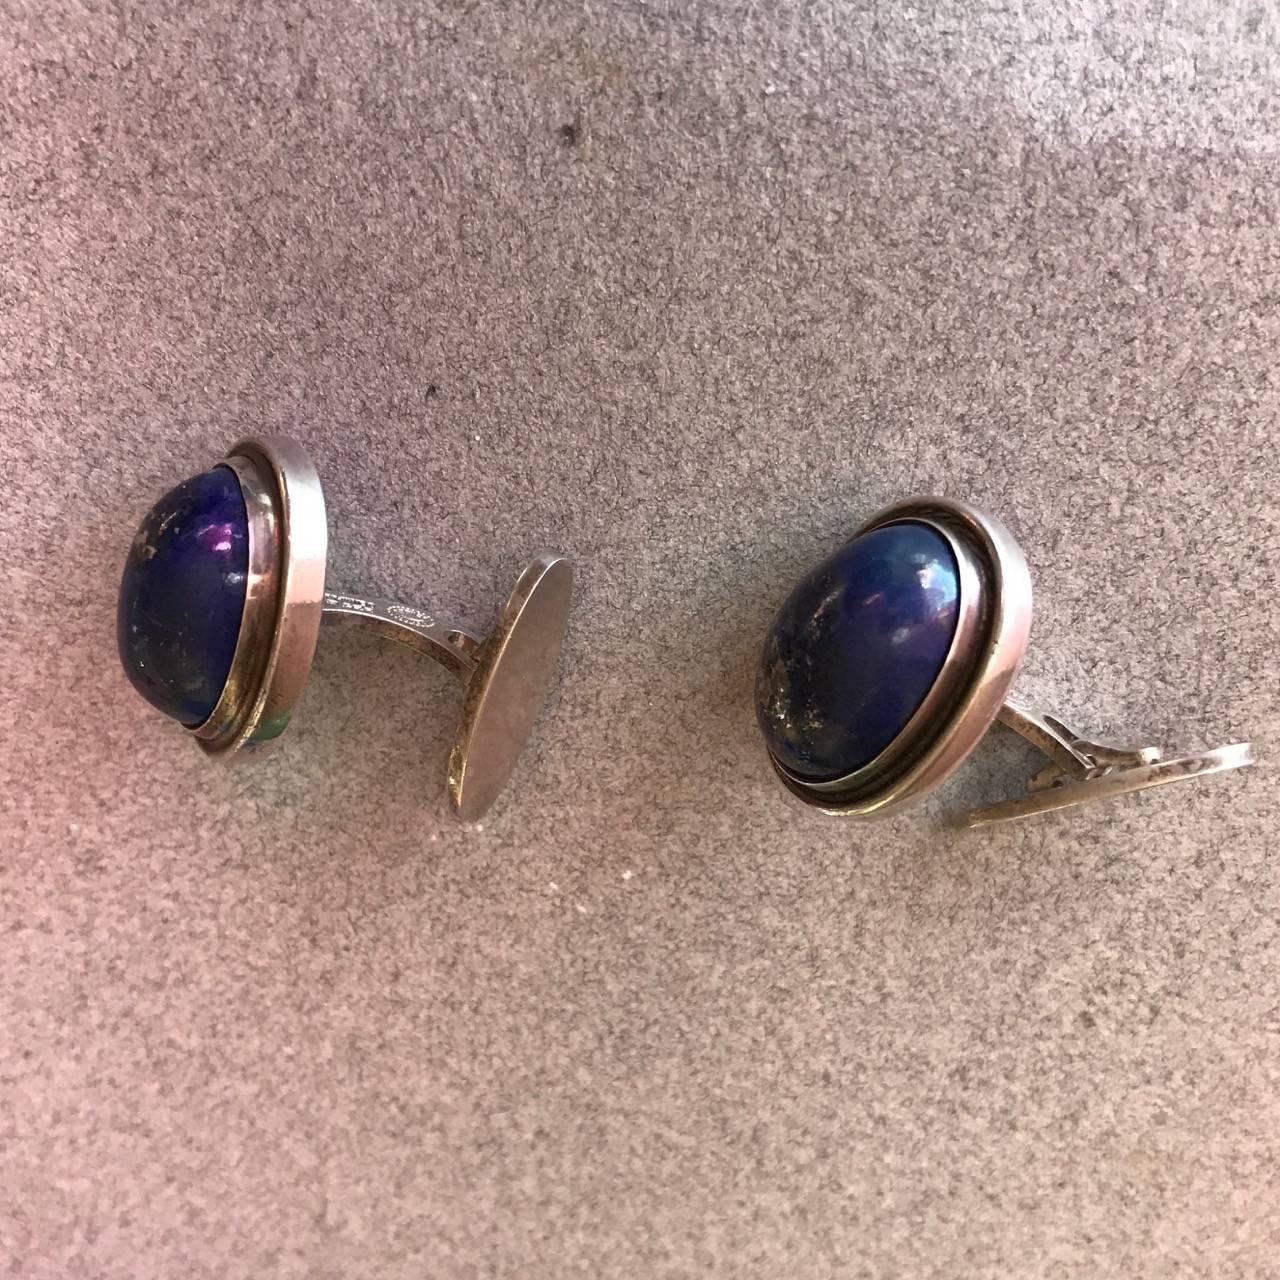 Georg Jensen Sterling Silver Cufflinks with Lapis Lazuli No. 44A by Harald Nielsen

Classically elegant, Art Deco design from the 1940s.  These large cufflinks are in excellent condition with vivid blue Lapis with pyrite flecks that catch the